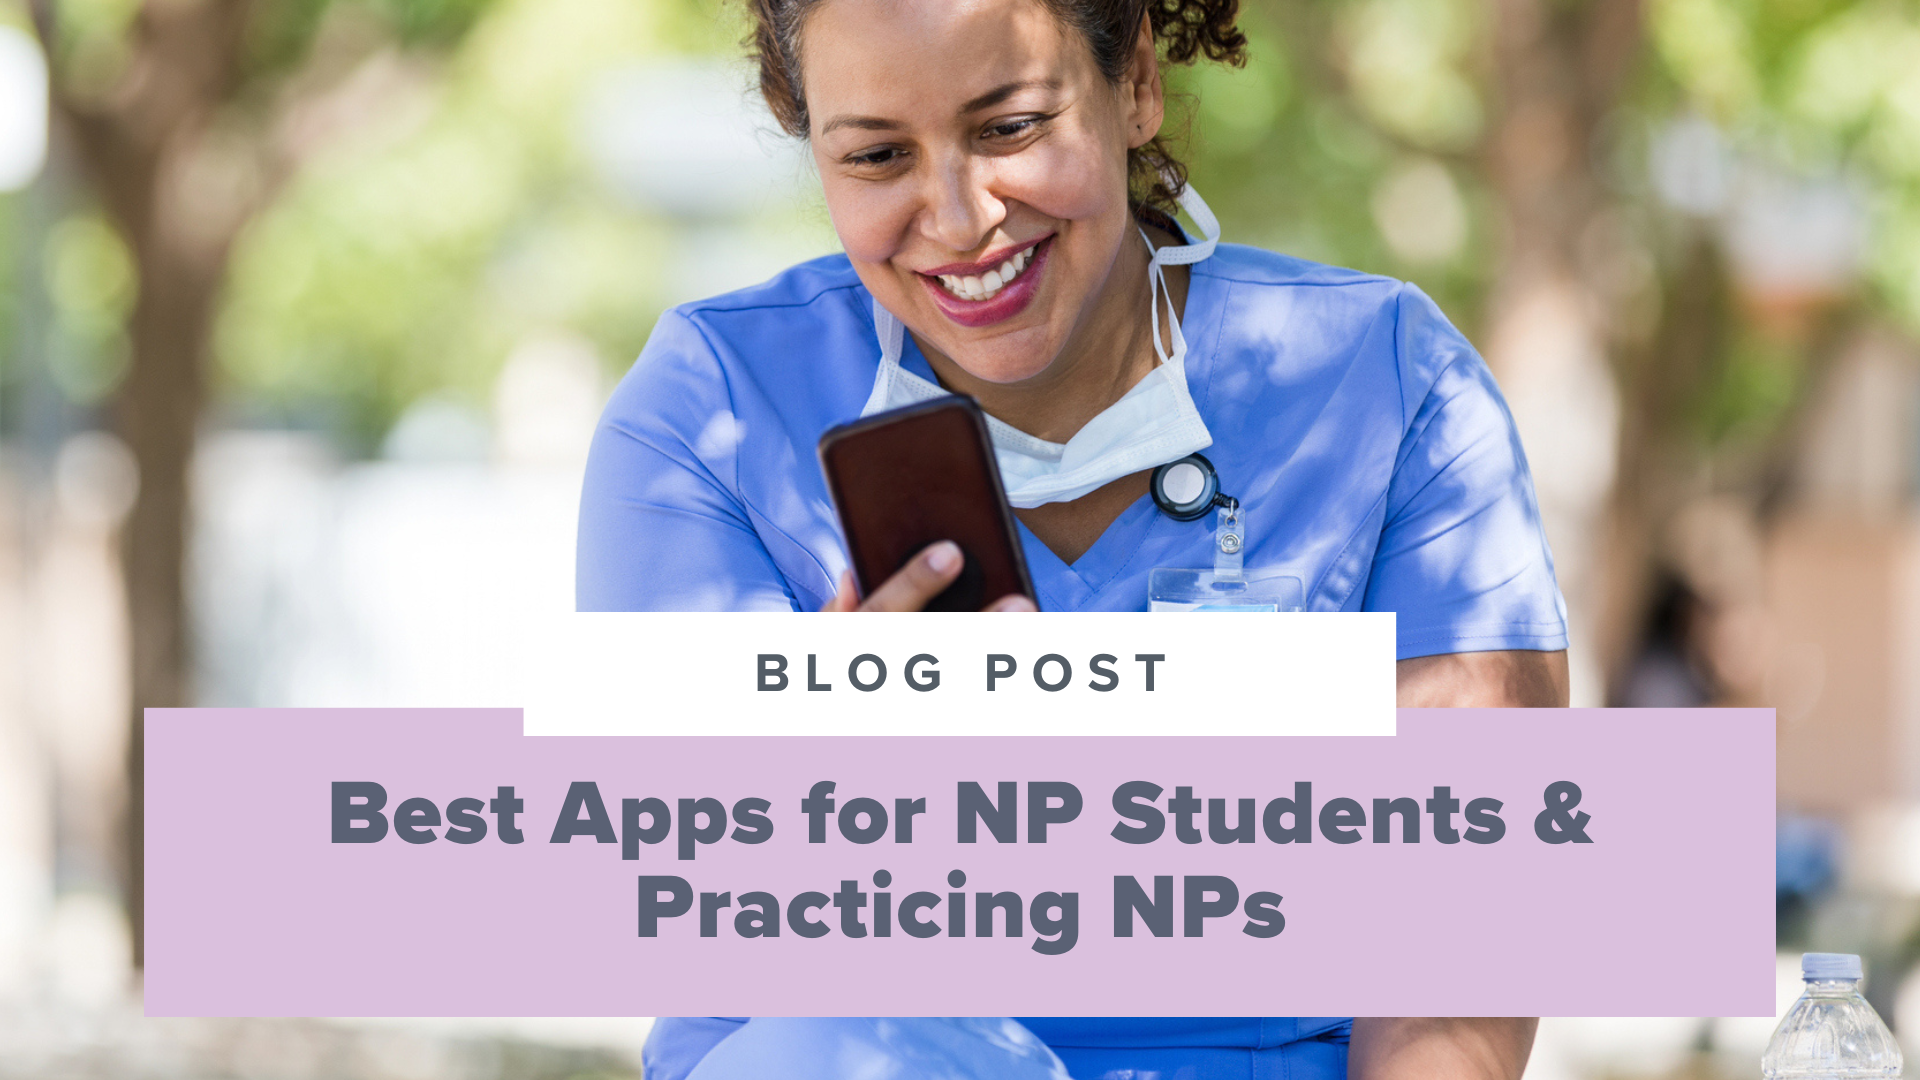 SMNP Blog - Best NP Apps for Learning, Scheduling, Note-Taking, & More